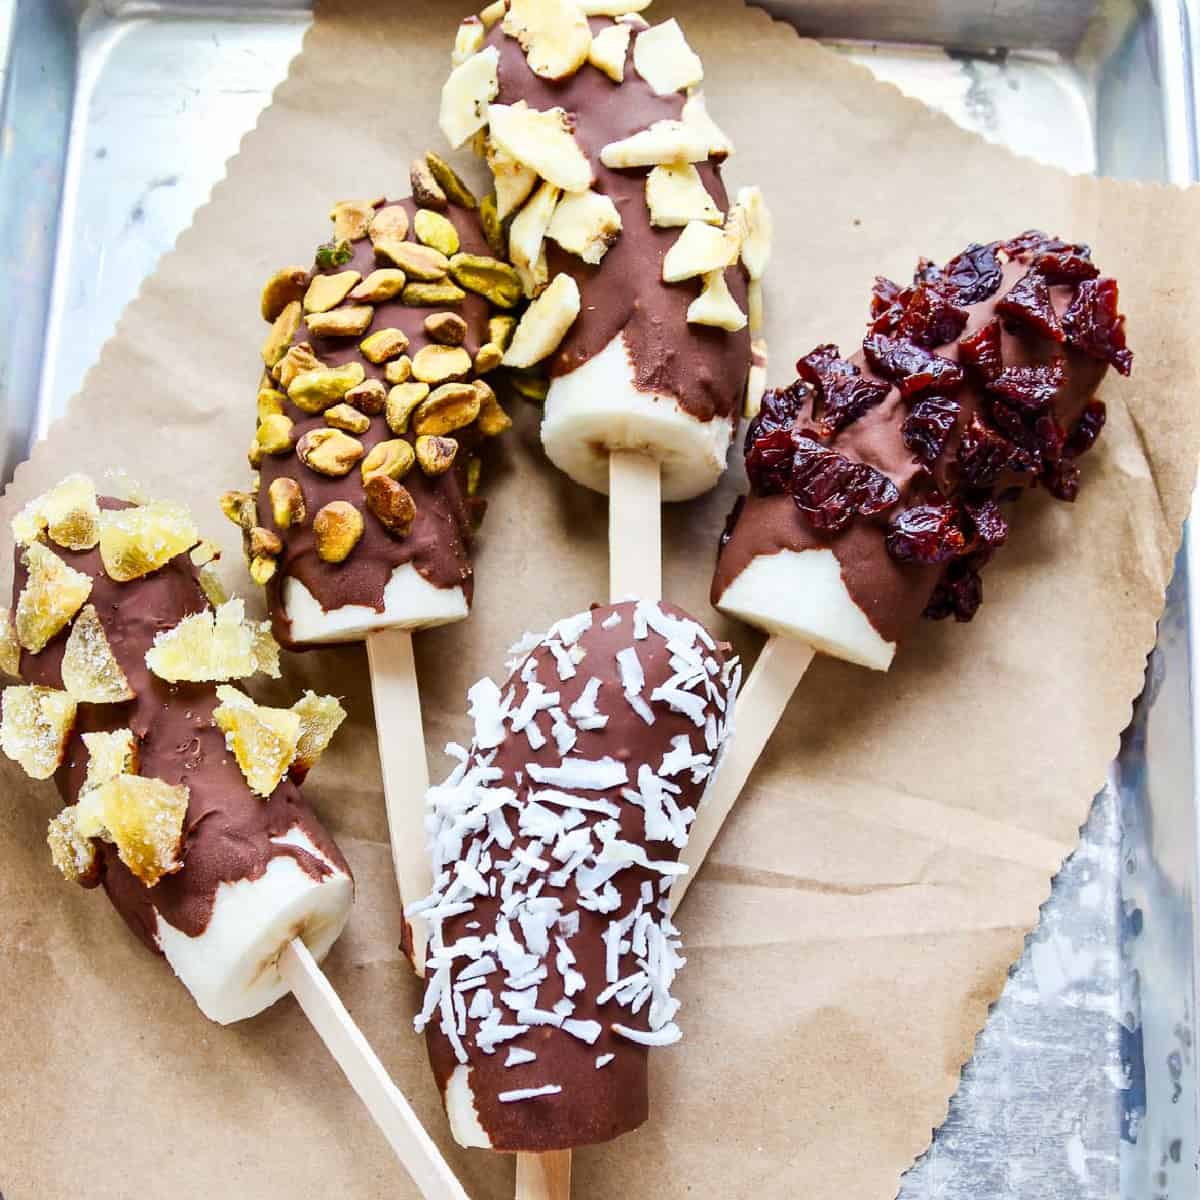 A small aluminum sheet pan with brown paper and 5 frozen bananas chocolate dipped and coated in nuts and dried fruit.